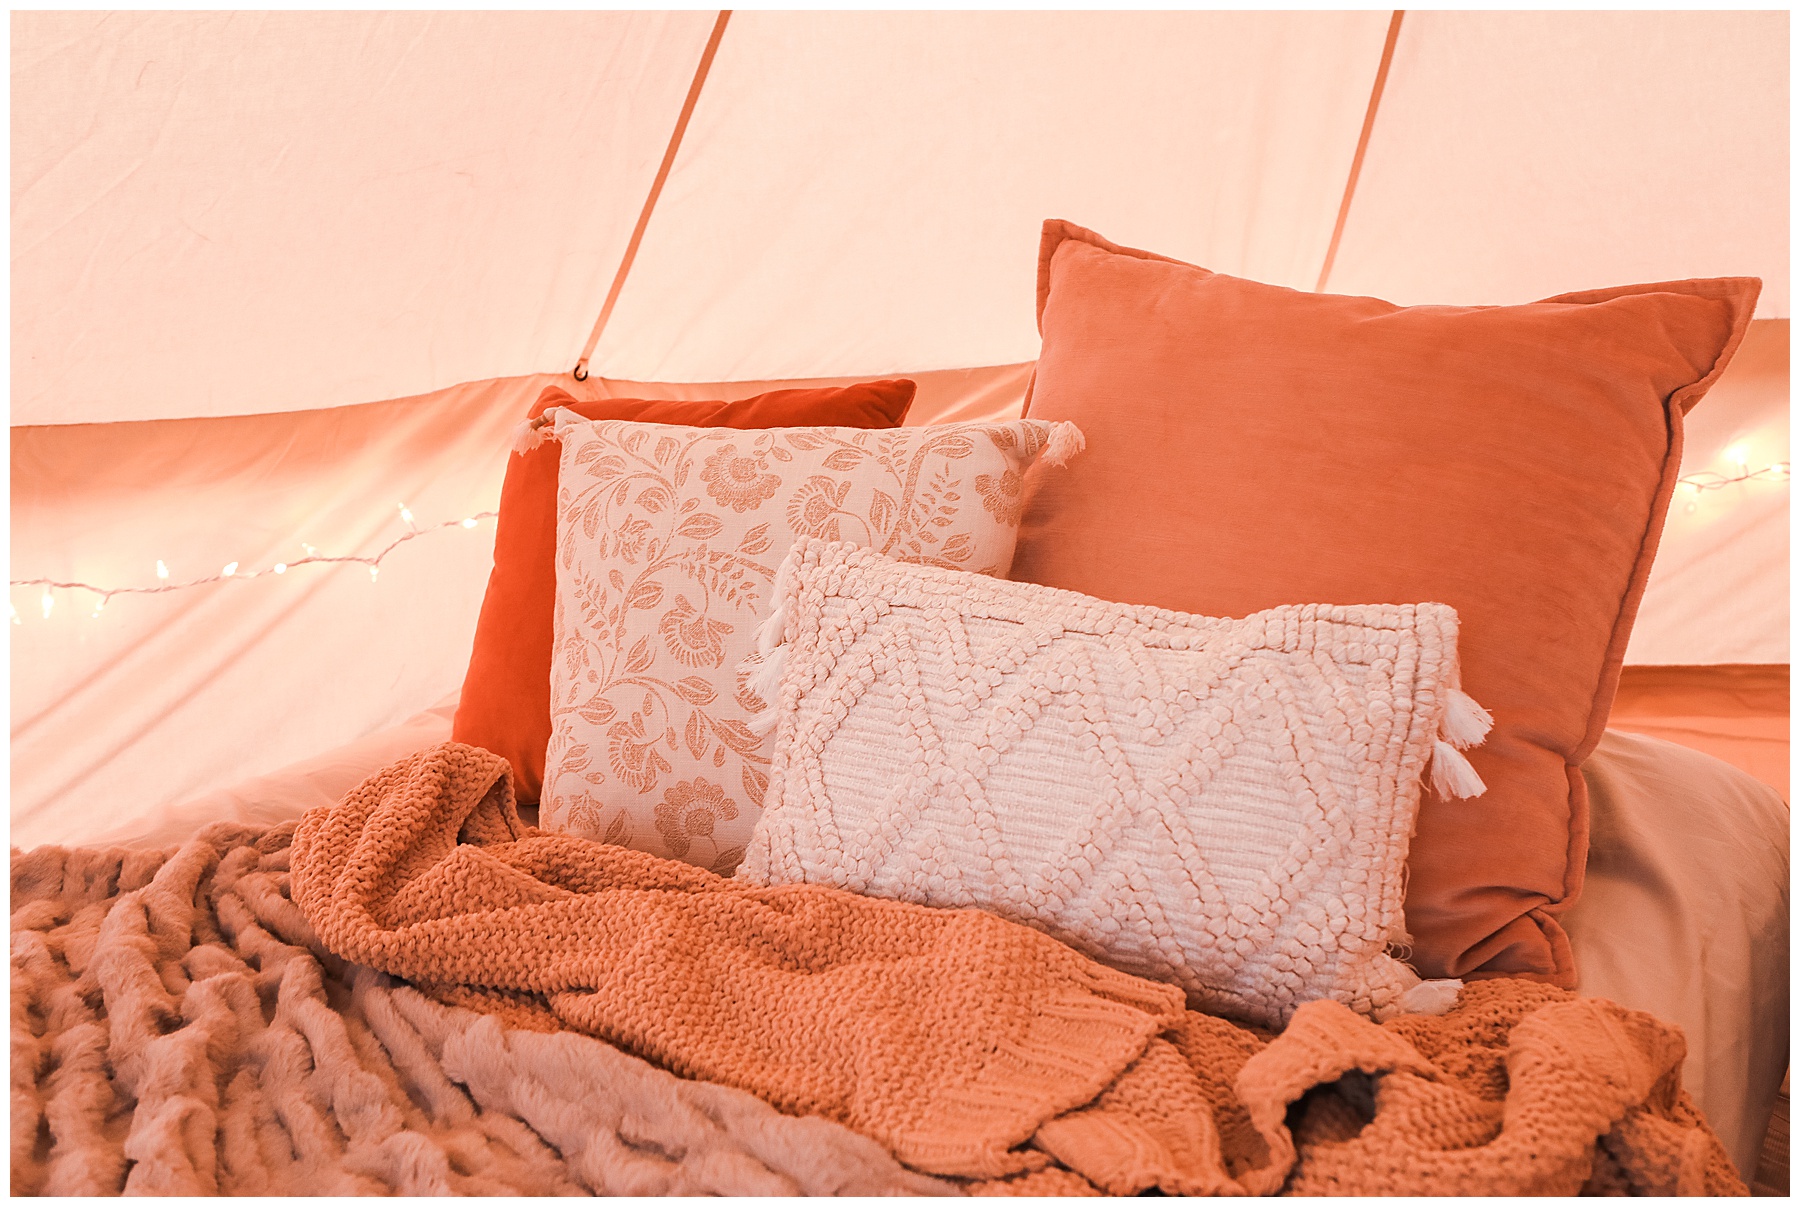 Pillows in tent